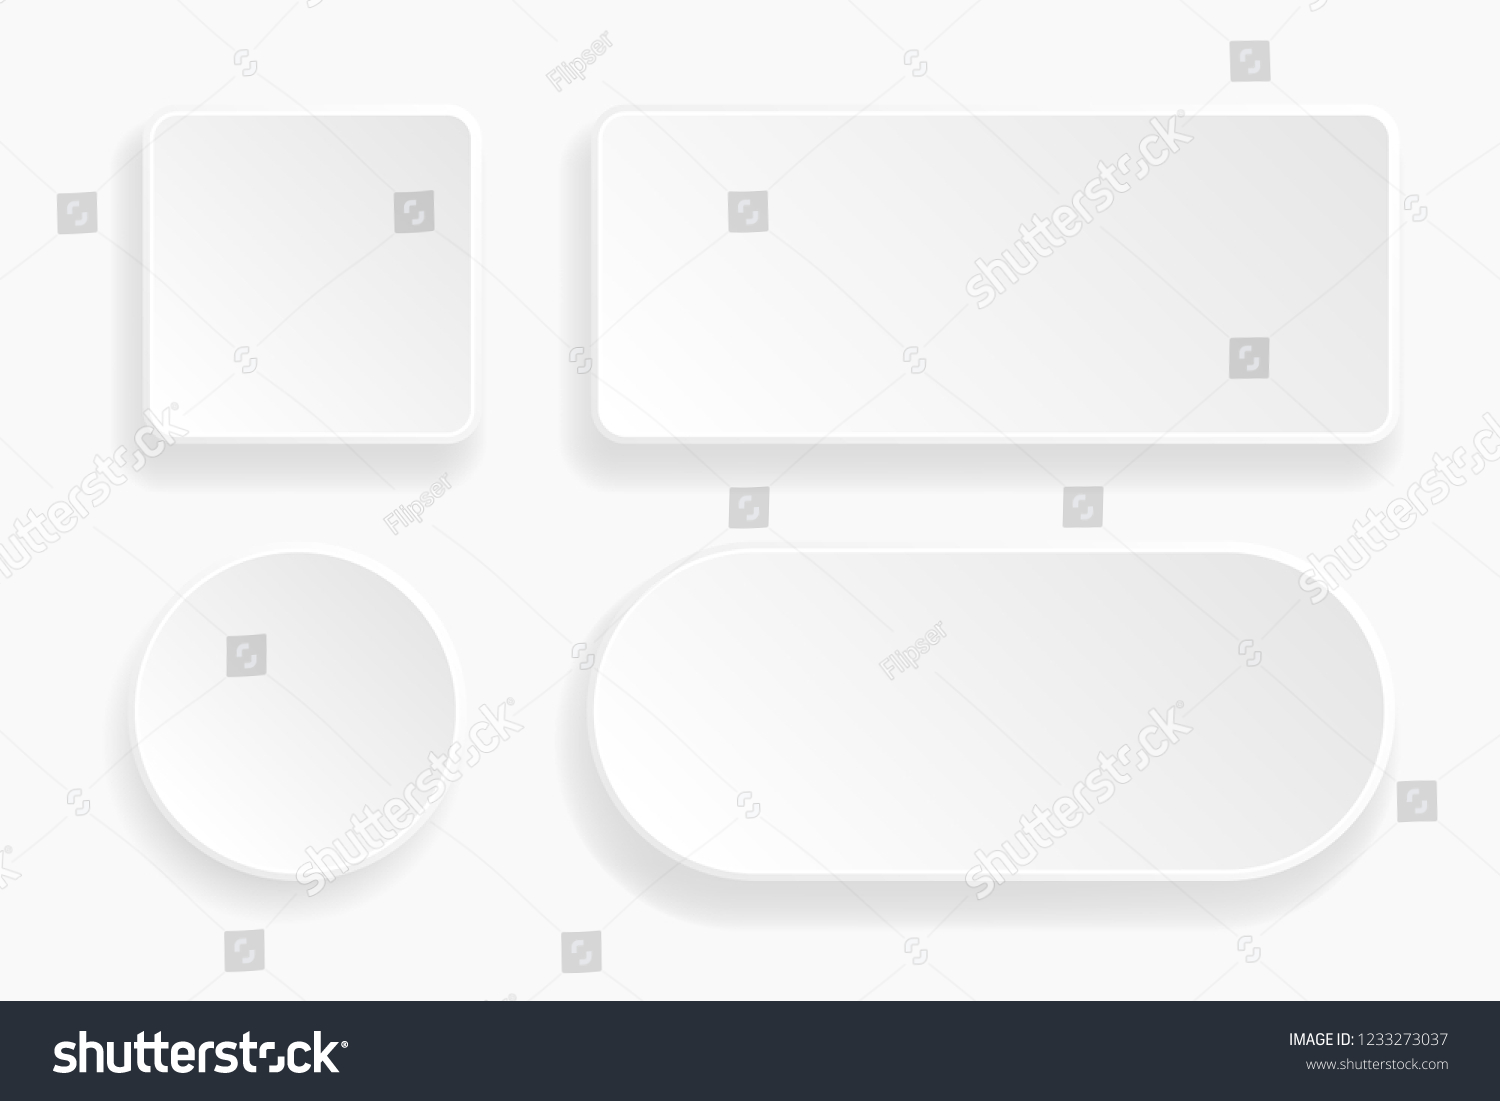 Web embossed 3d buttons. White blank 3d icons. Vector illustration #1233273037